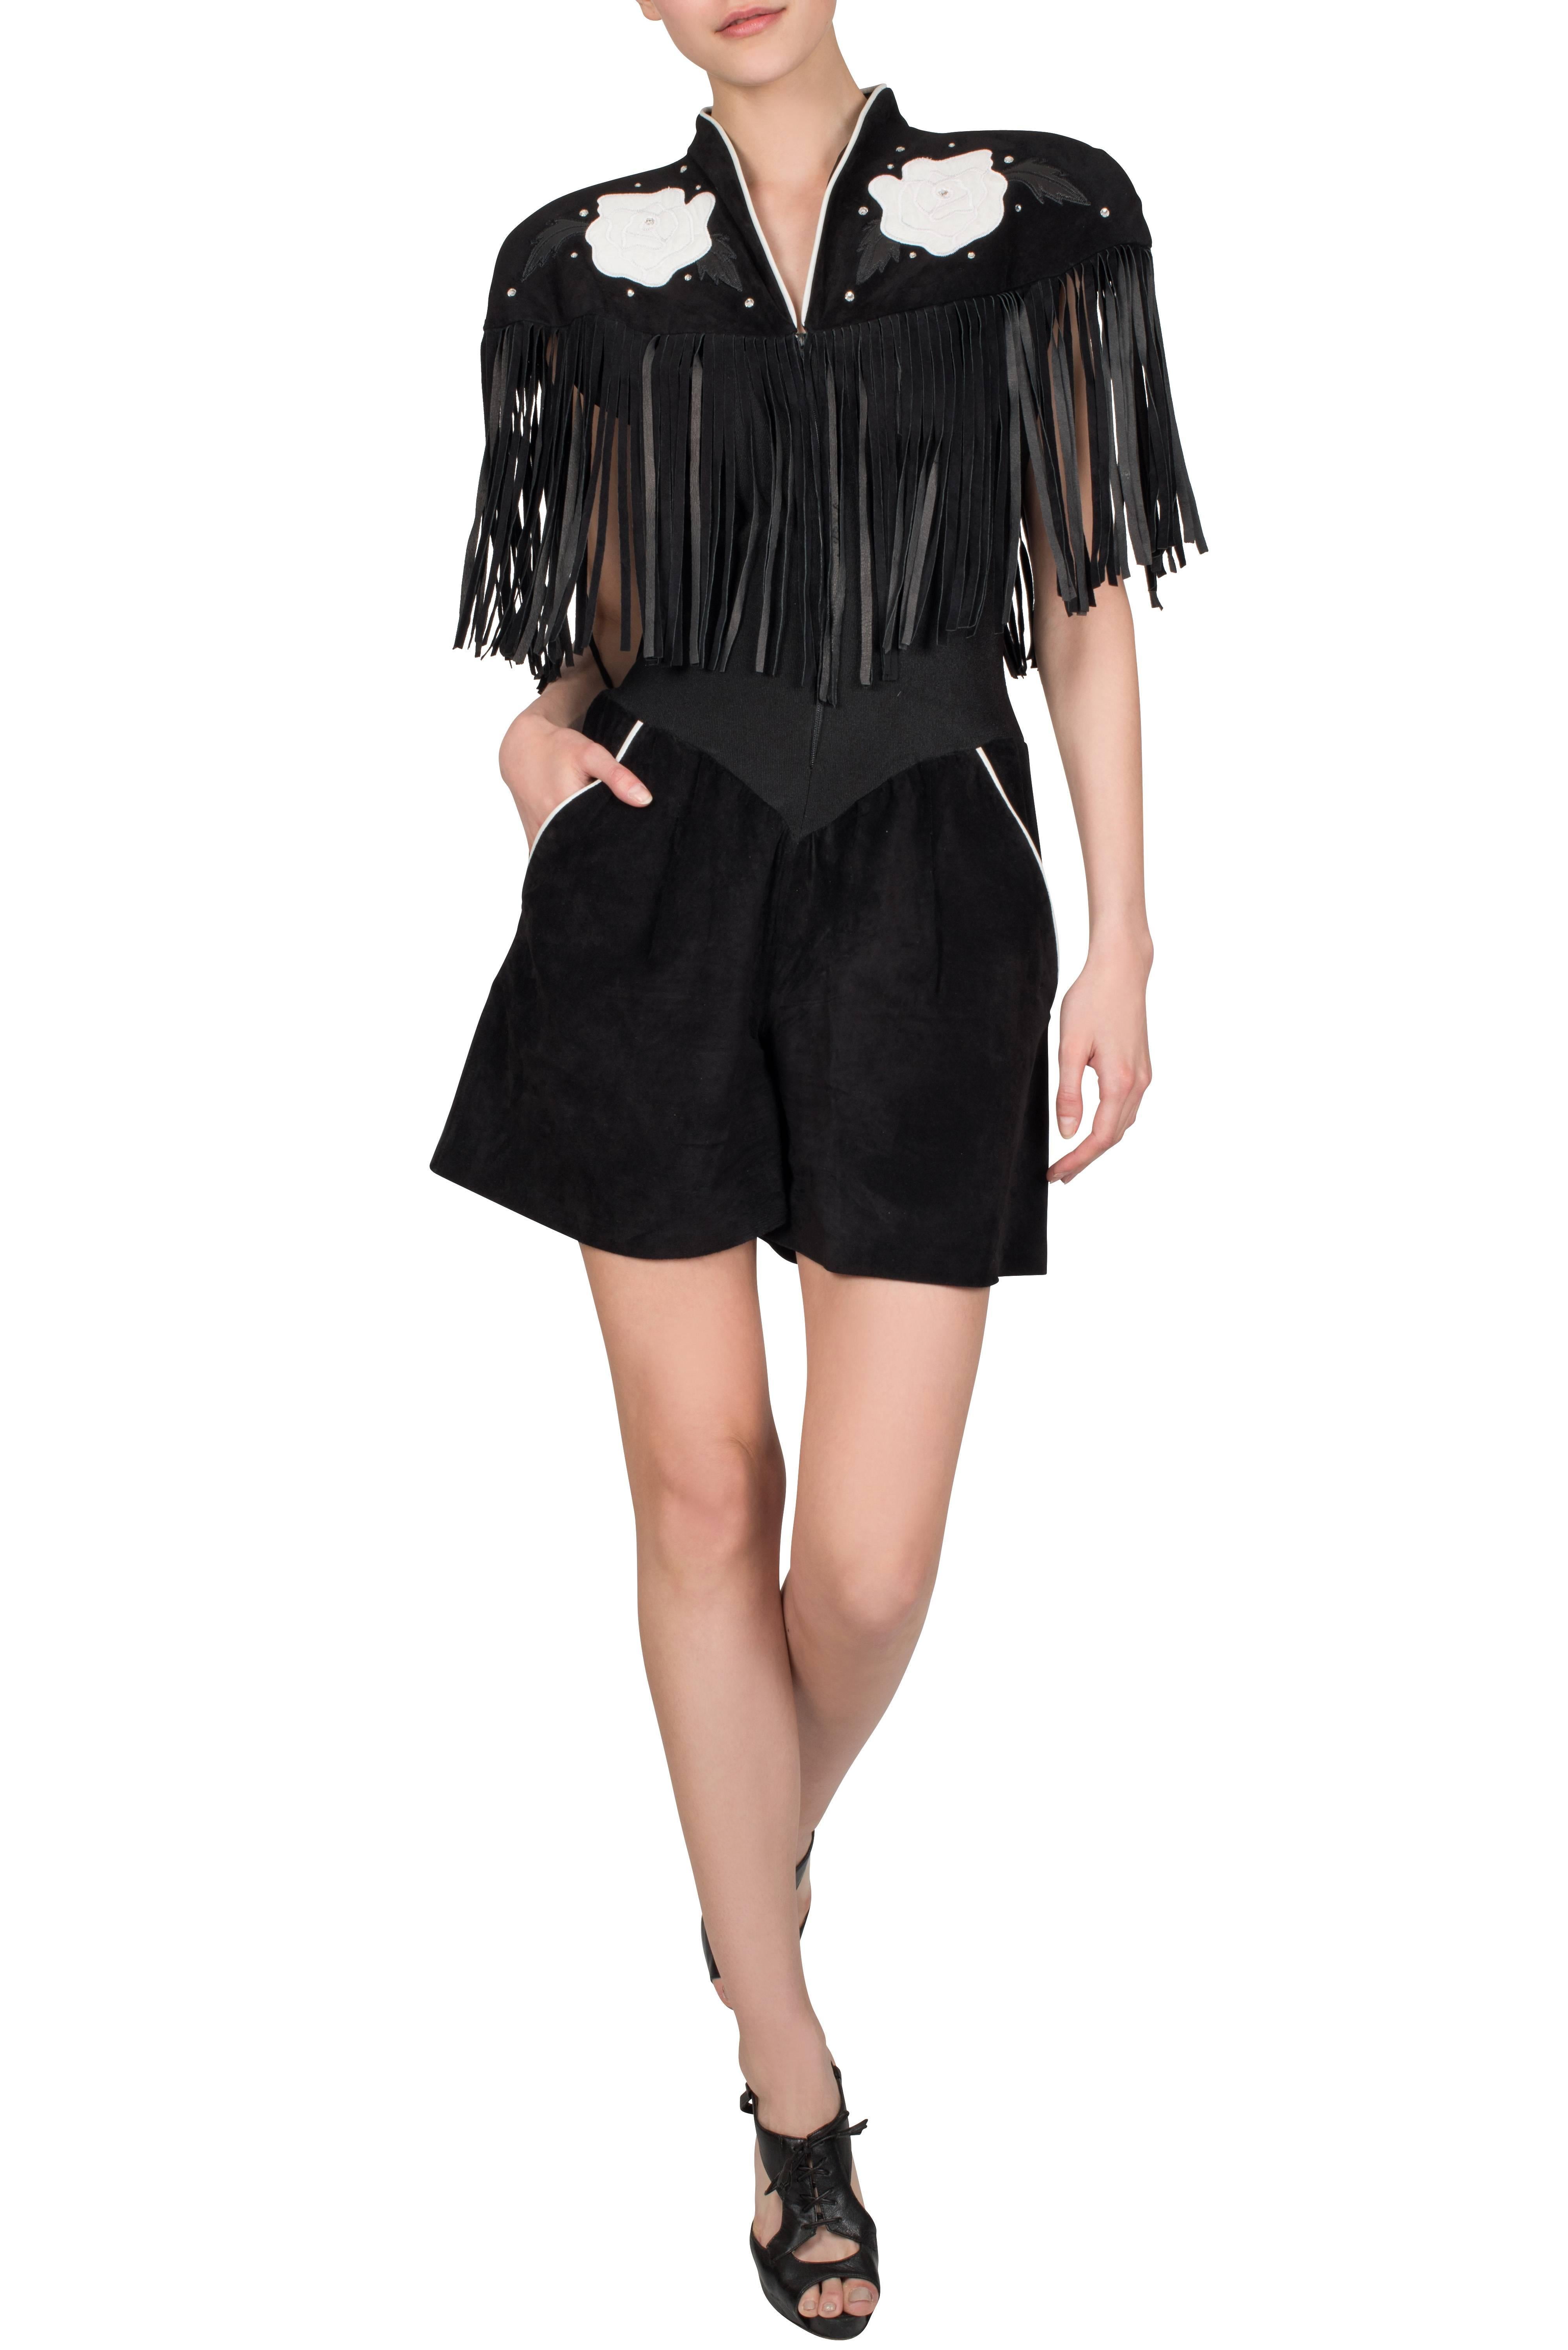 A 1980's Caché black suede romper, with cowboy style fringes circling the upper part of the top, cap sleeves and back. White leather rose appliqués and rhinestones embellish the front and centre back. The centre part of the bodice is made of a